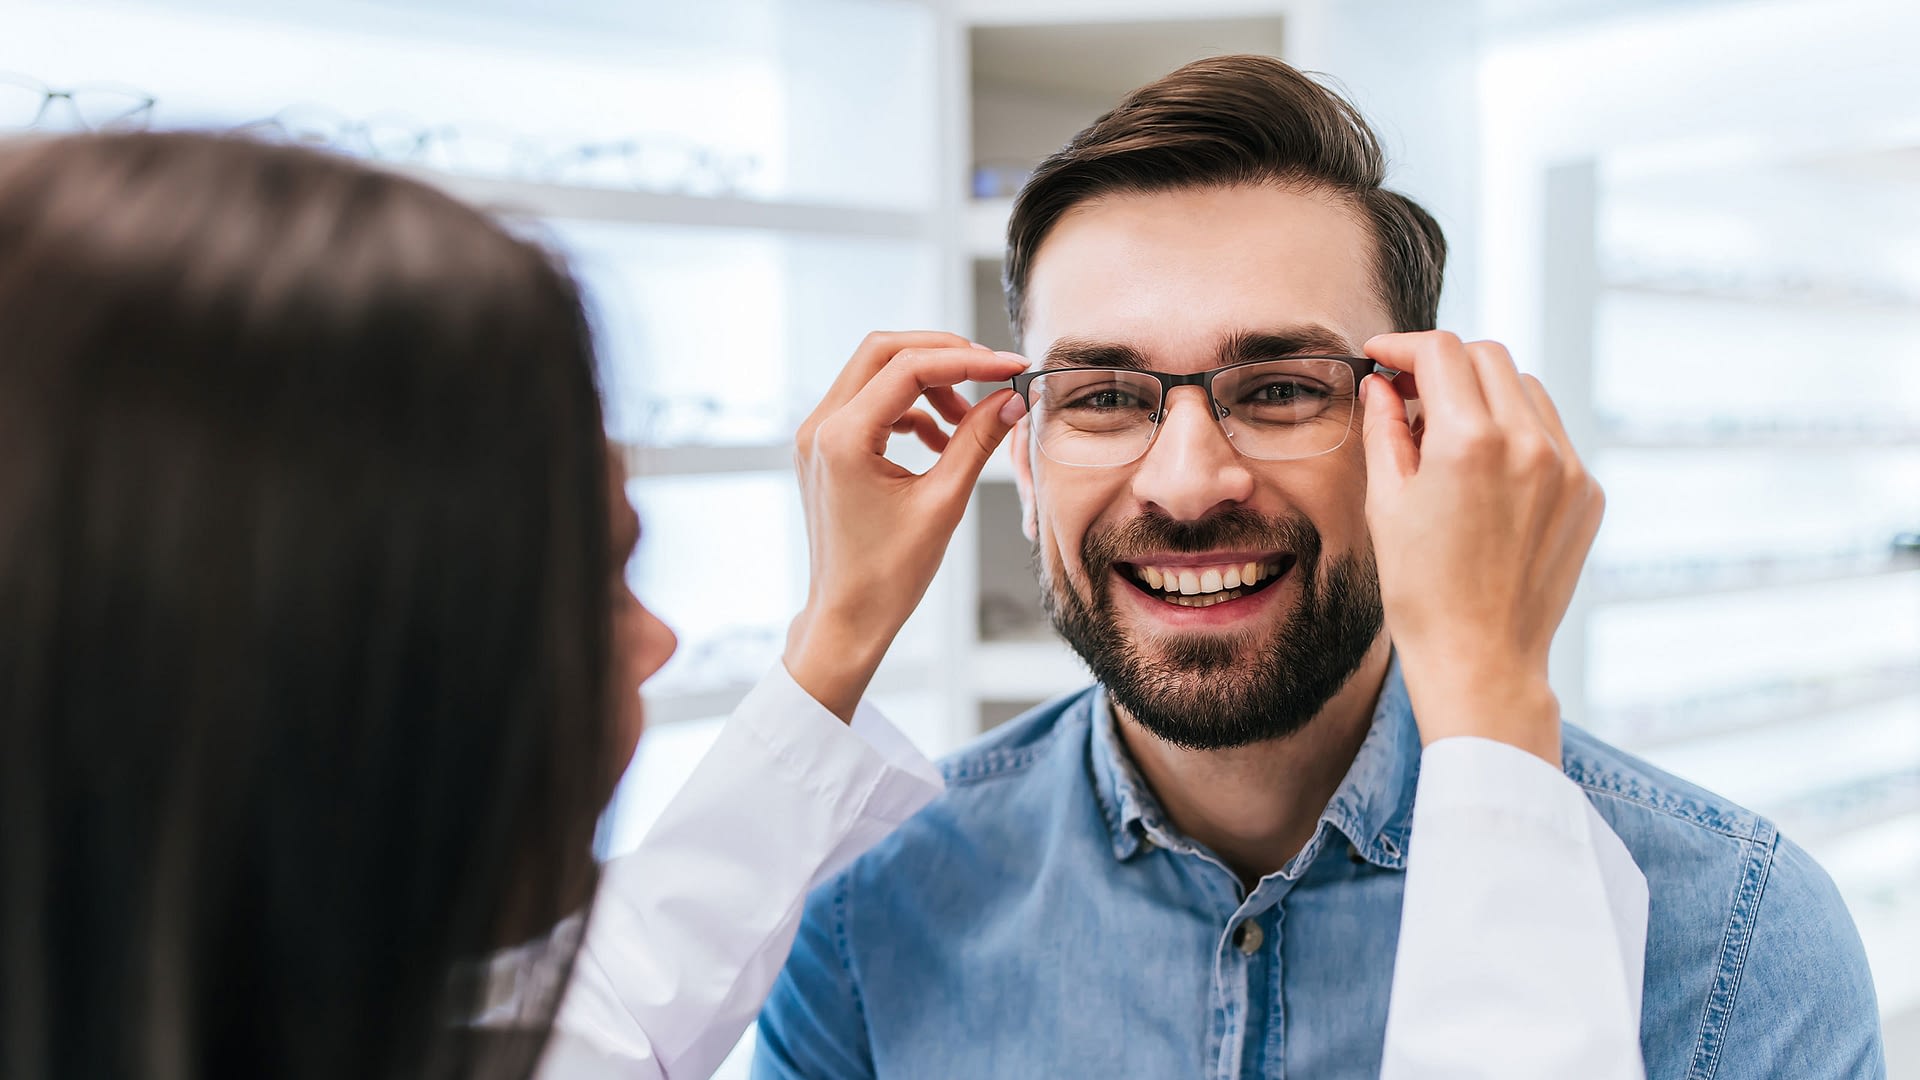 Man getting fitted with new glasses by an optometrist.